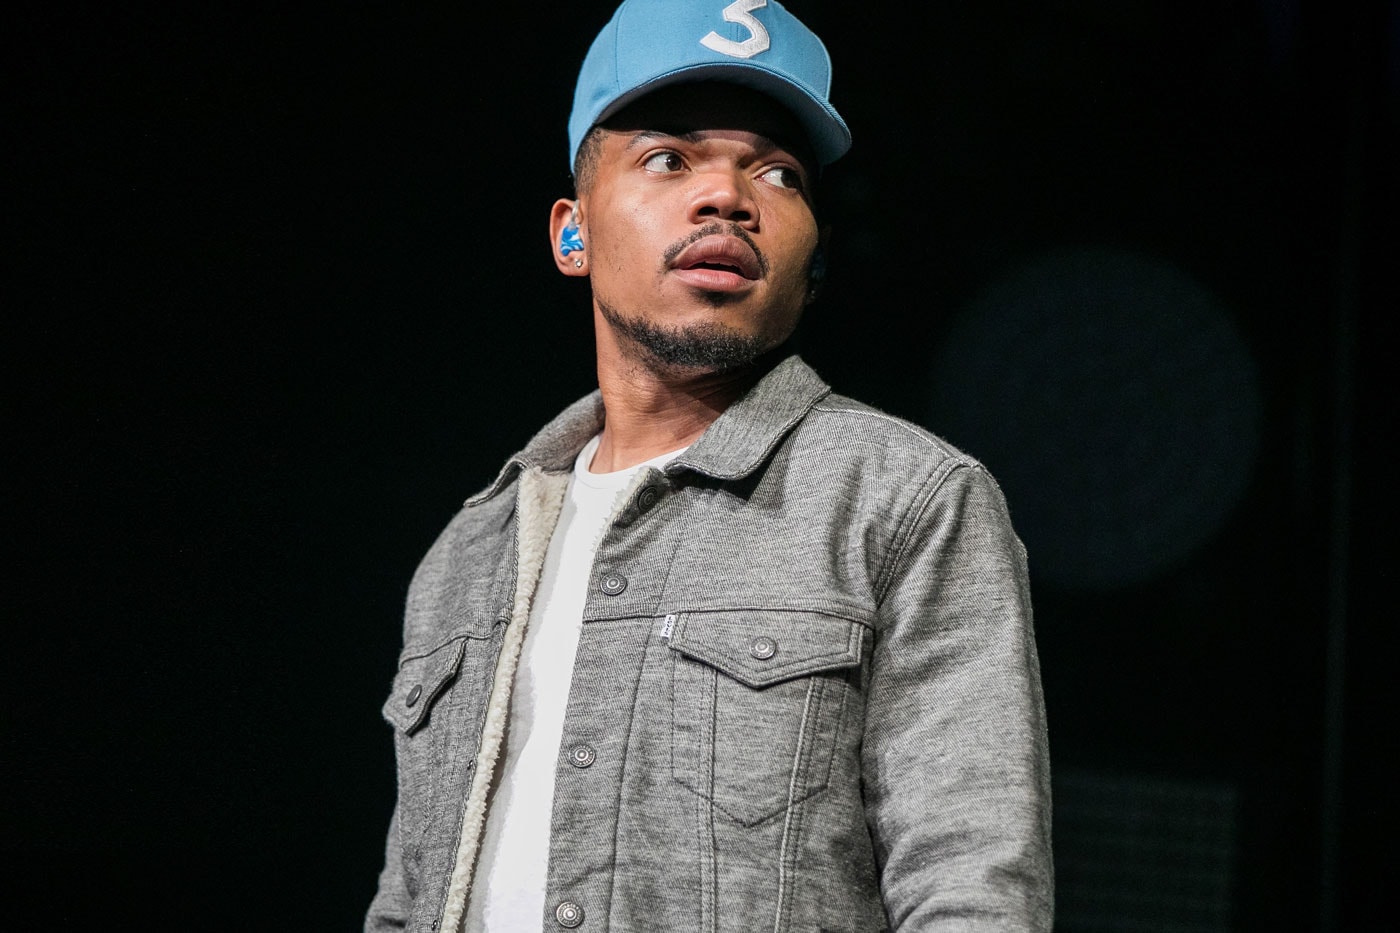 Chance The Rapper Charity Google Donation 1 5 Million One Point Five USD Dollars